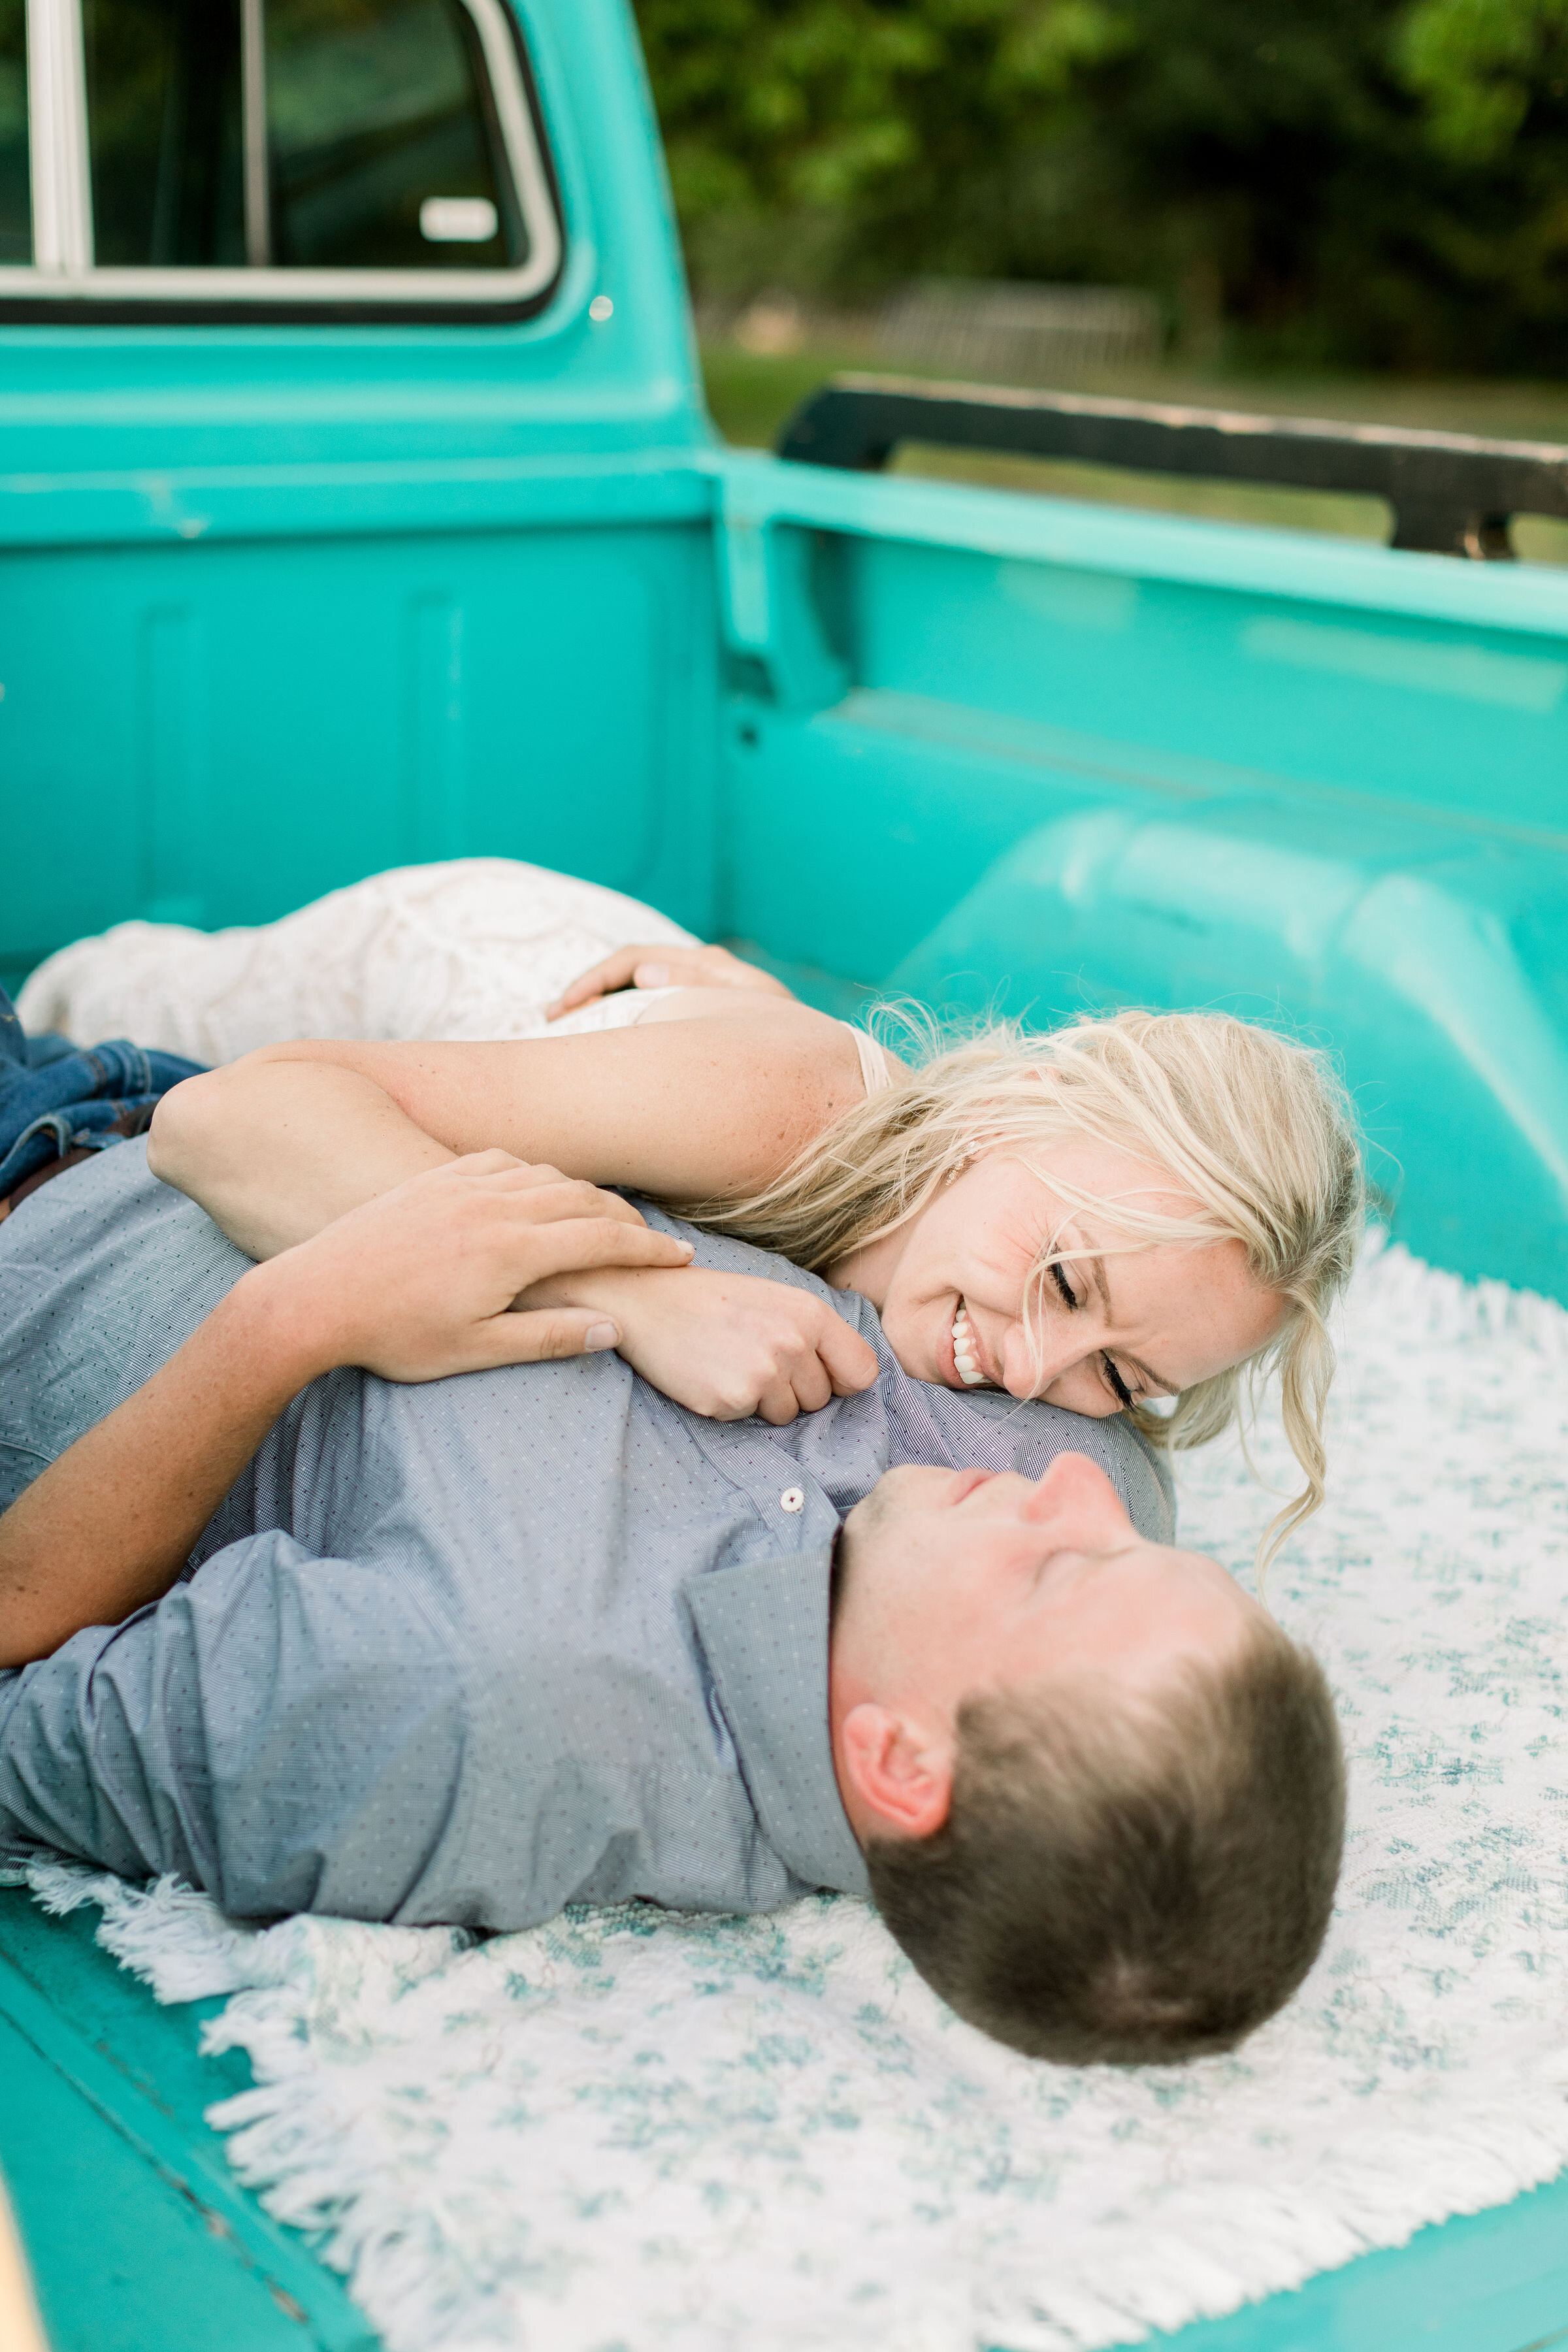  During this southern-styled engagement session in Ottawa, Canada, Chelsea Mason Photography captures this engaged couple playfully laying down in the bed of their Tiffany blue vintage ford pickup truck. vintage ford truck cuddling engagement #Chelse